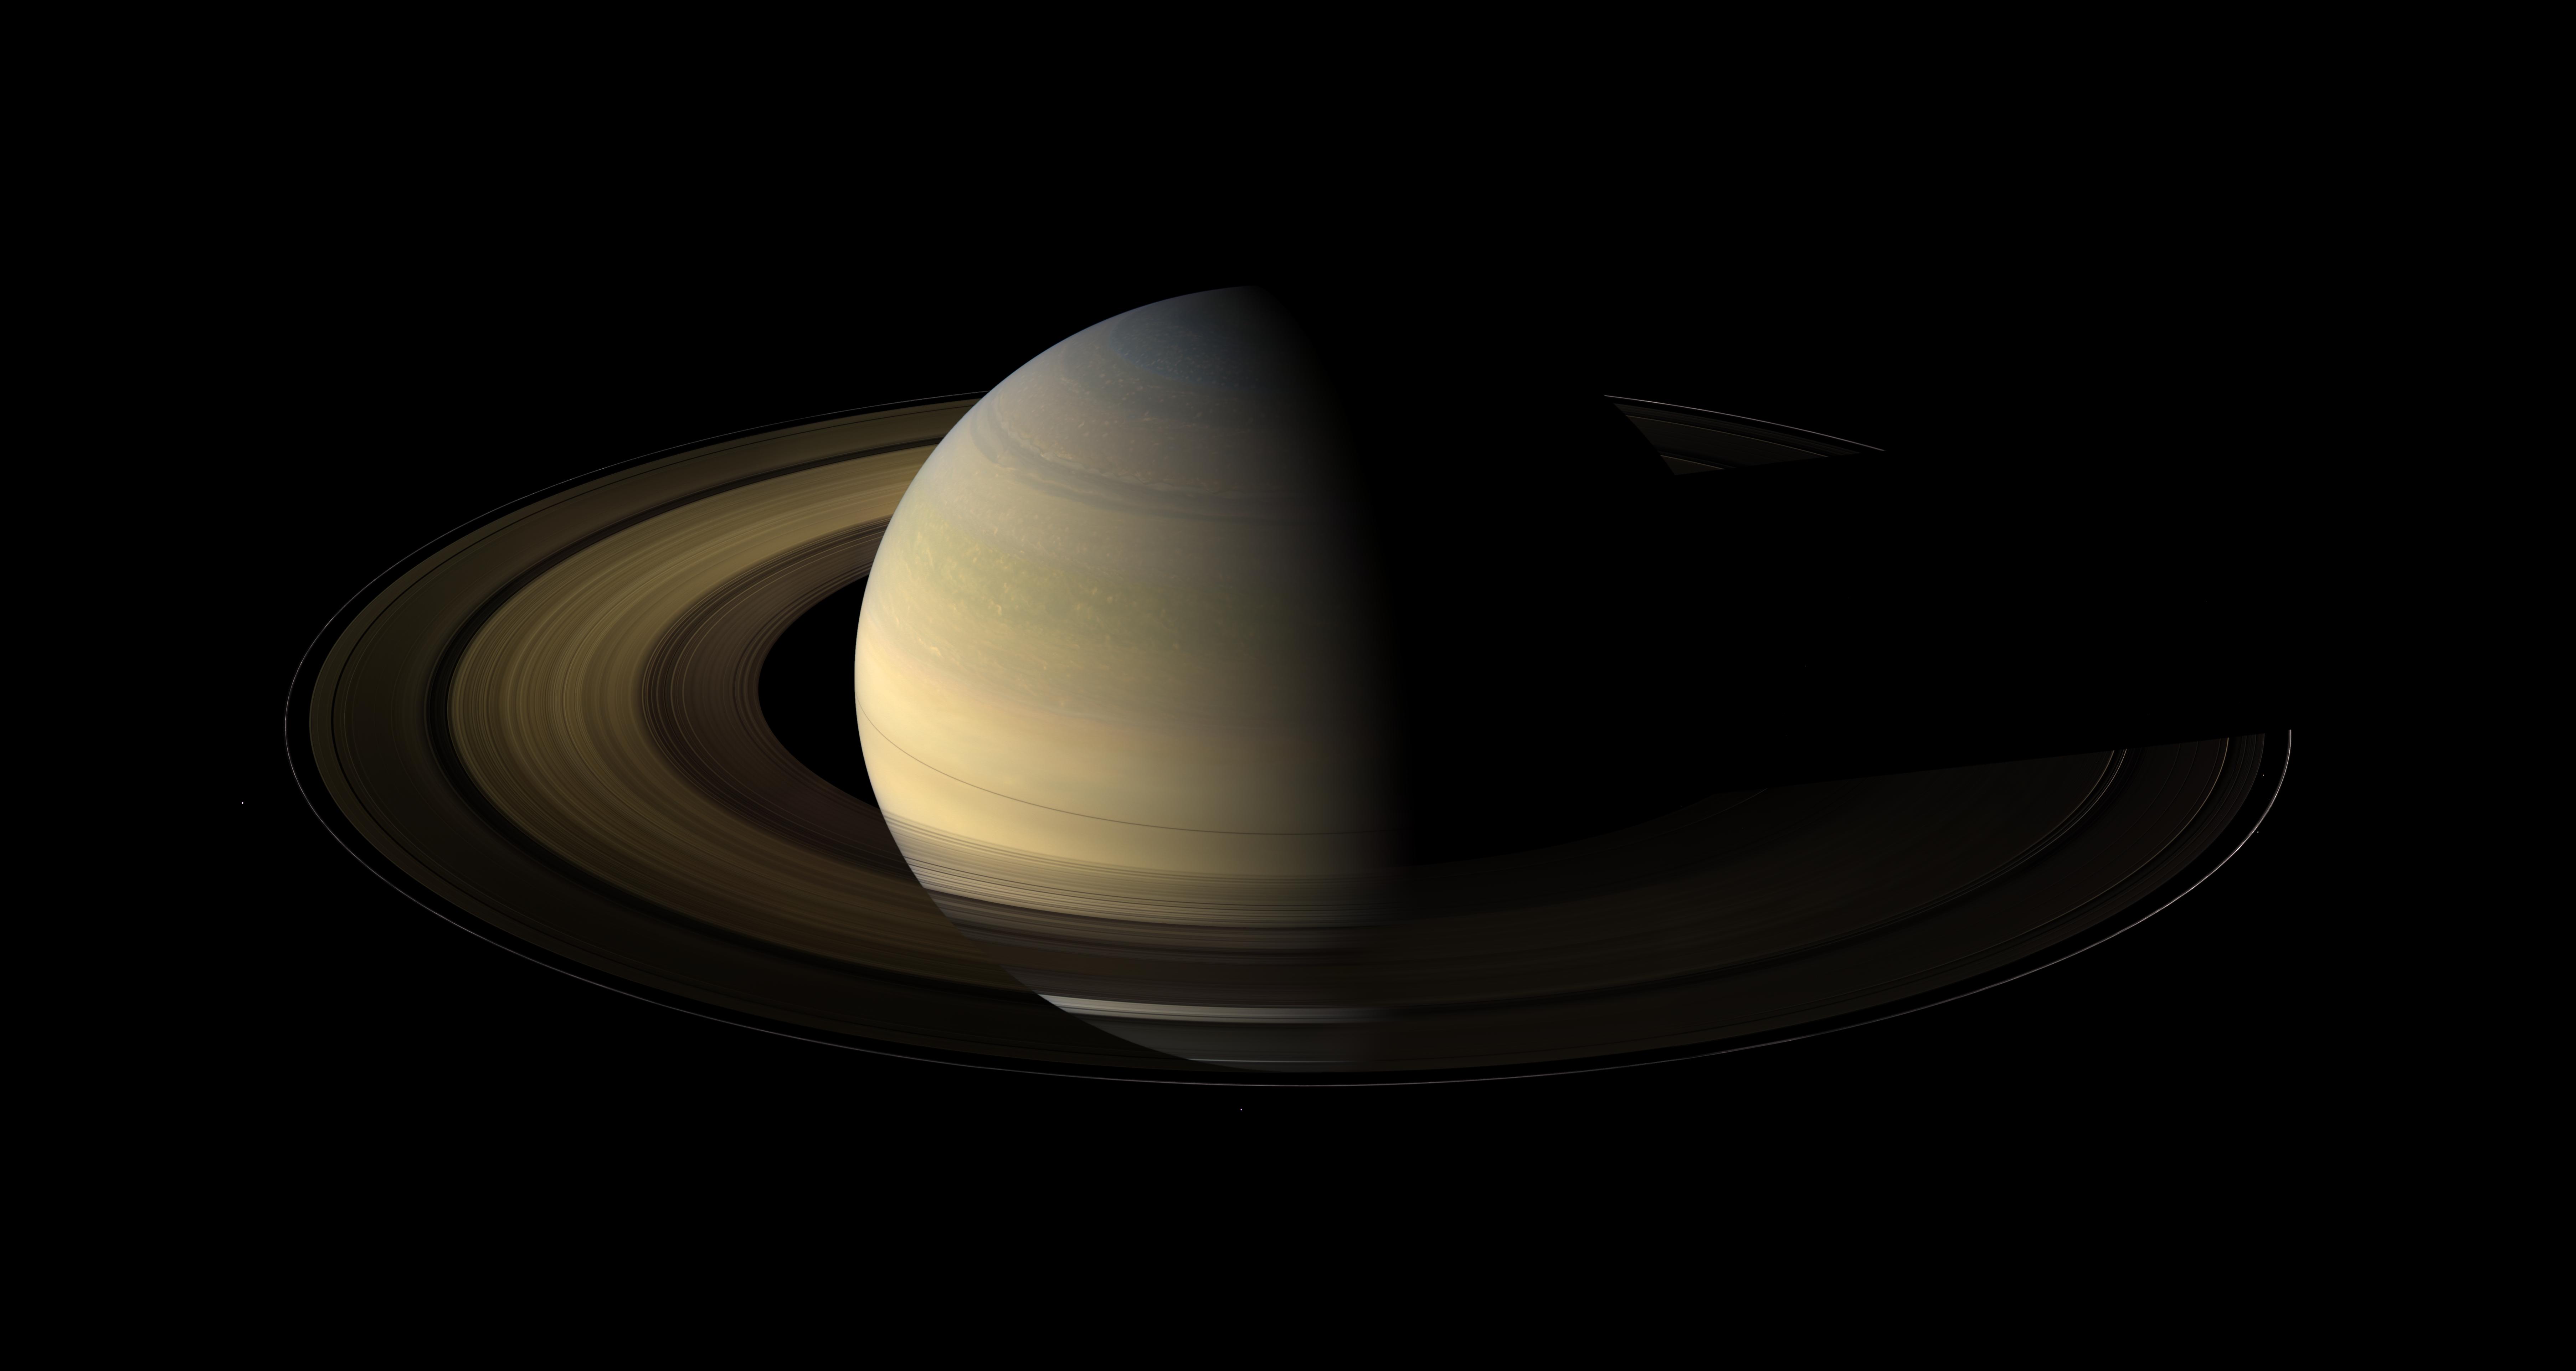 Saturn's equinox captured in a mosaic of light and dark, 